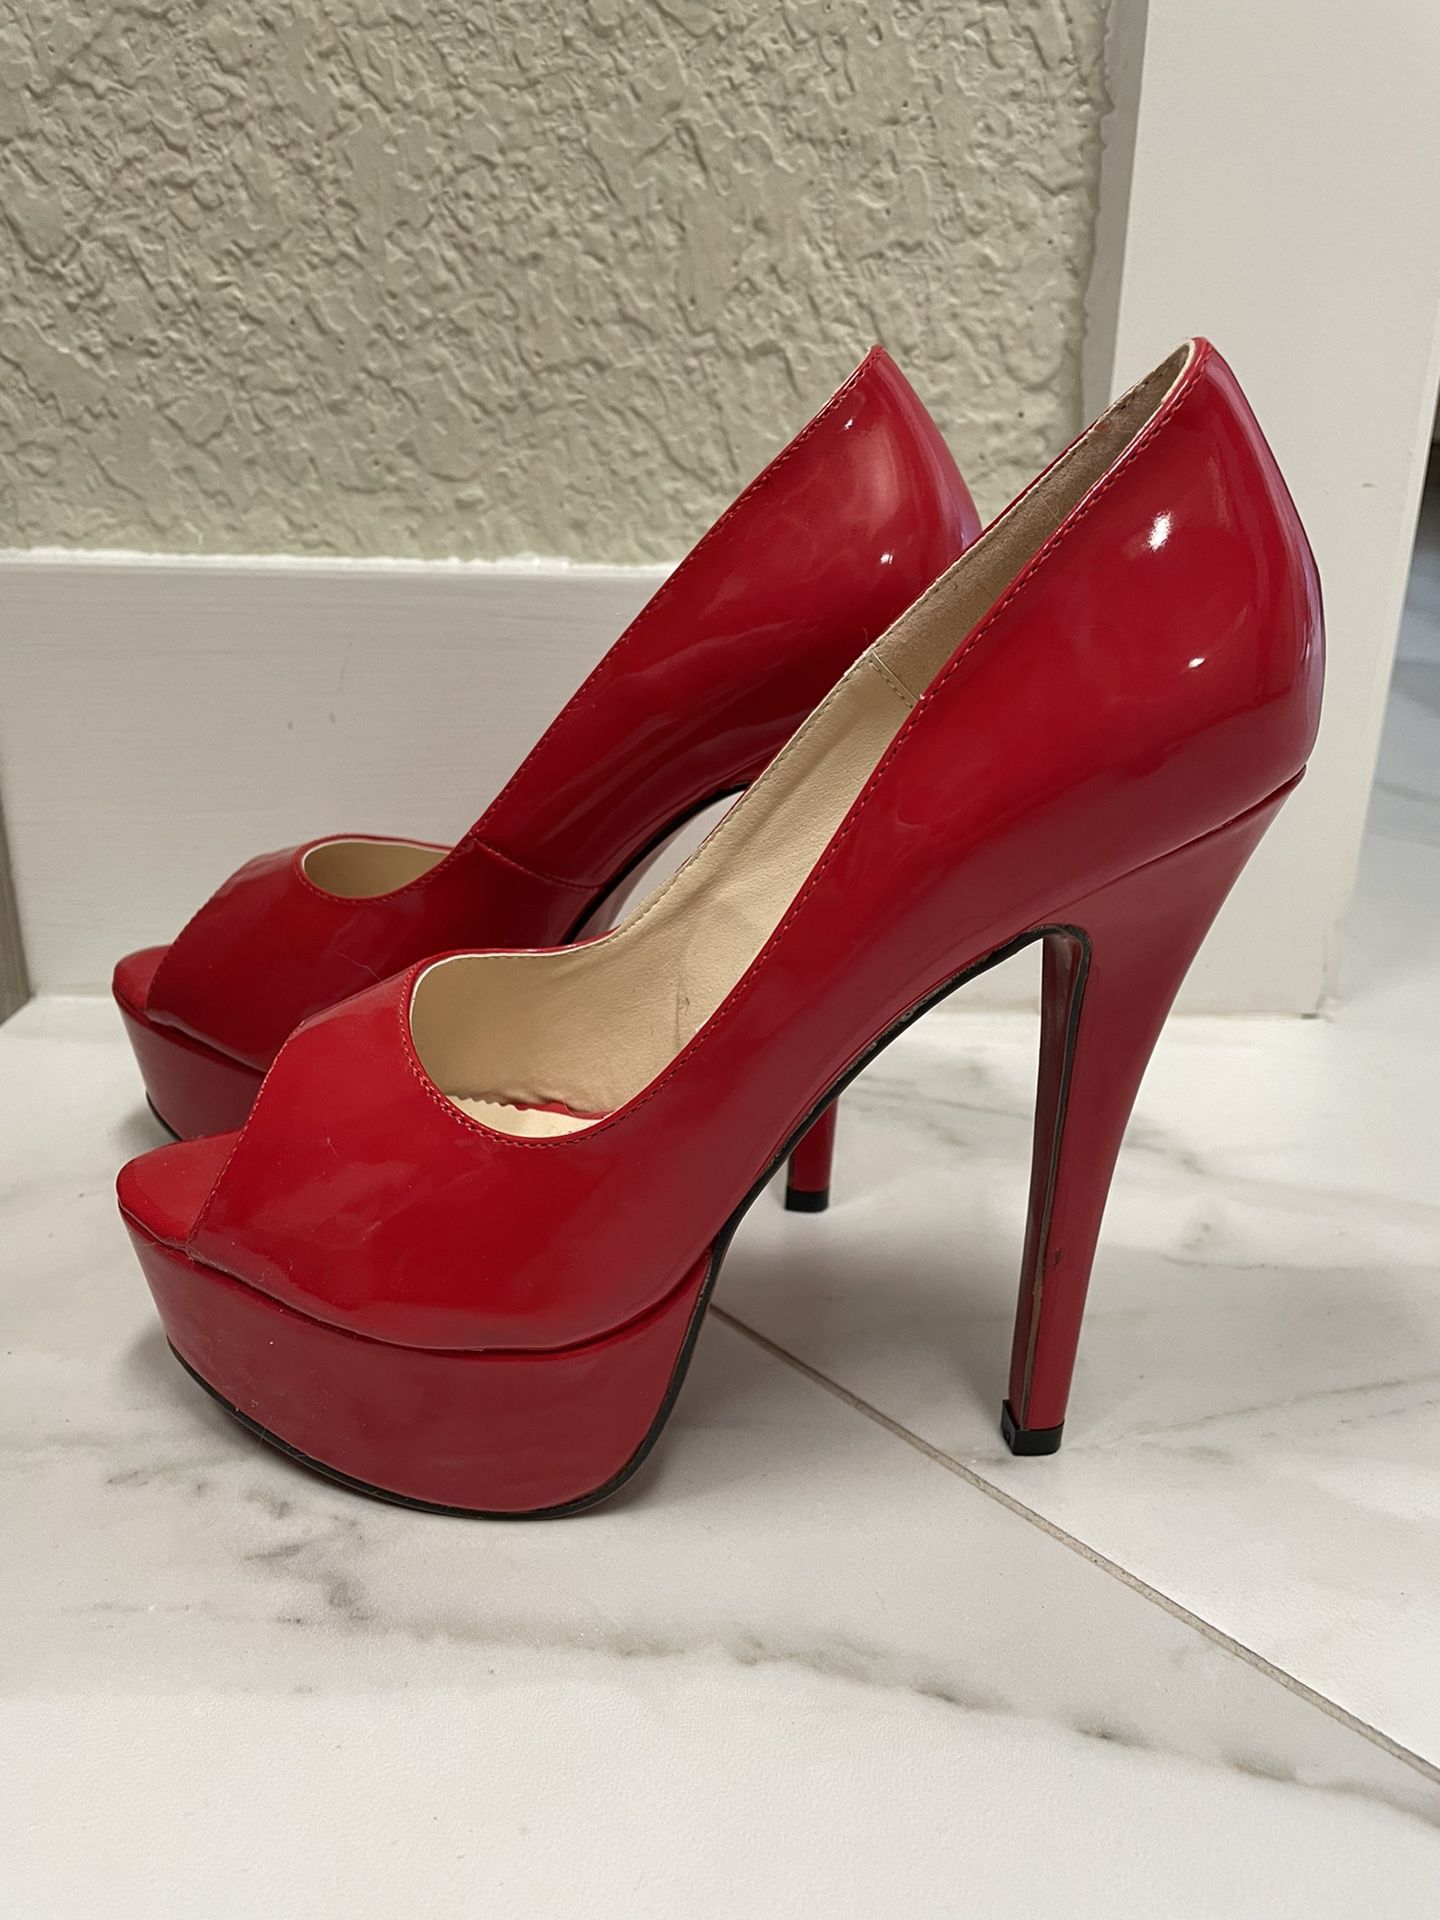 Red Patent Leather Pumps Size 7